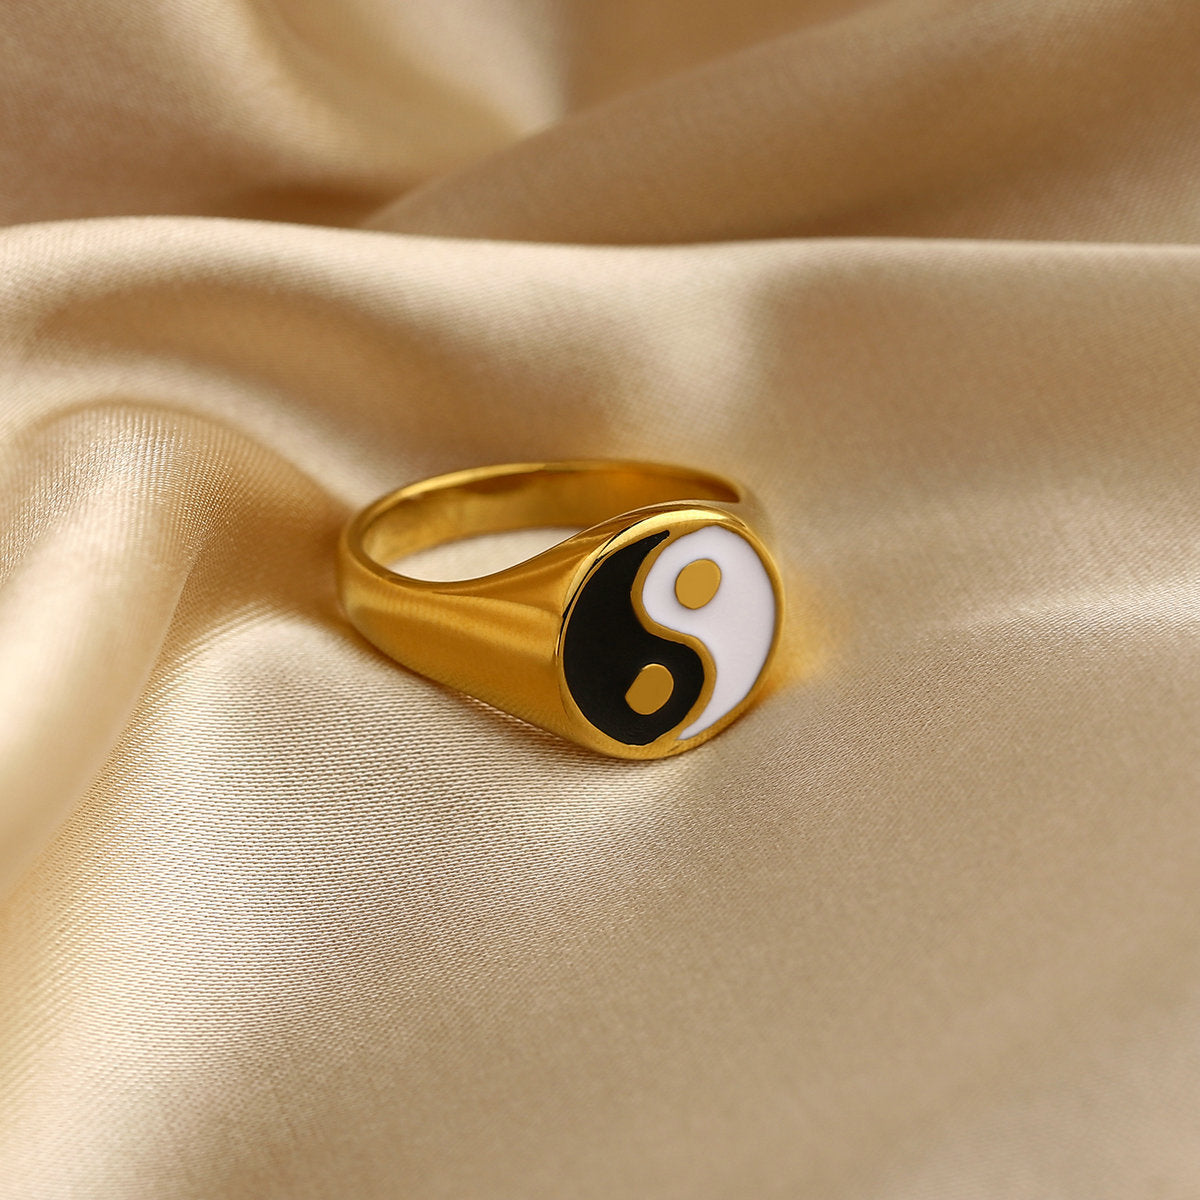 Waterproof 18K Gold Plated Stainless Steel Ring